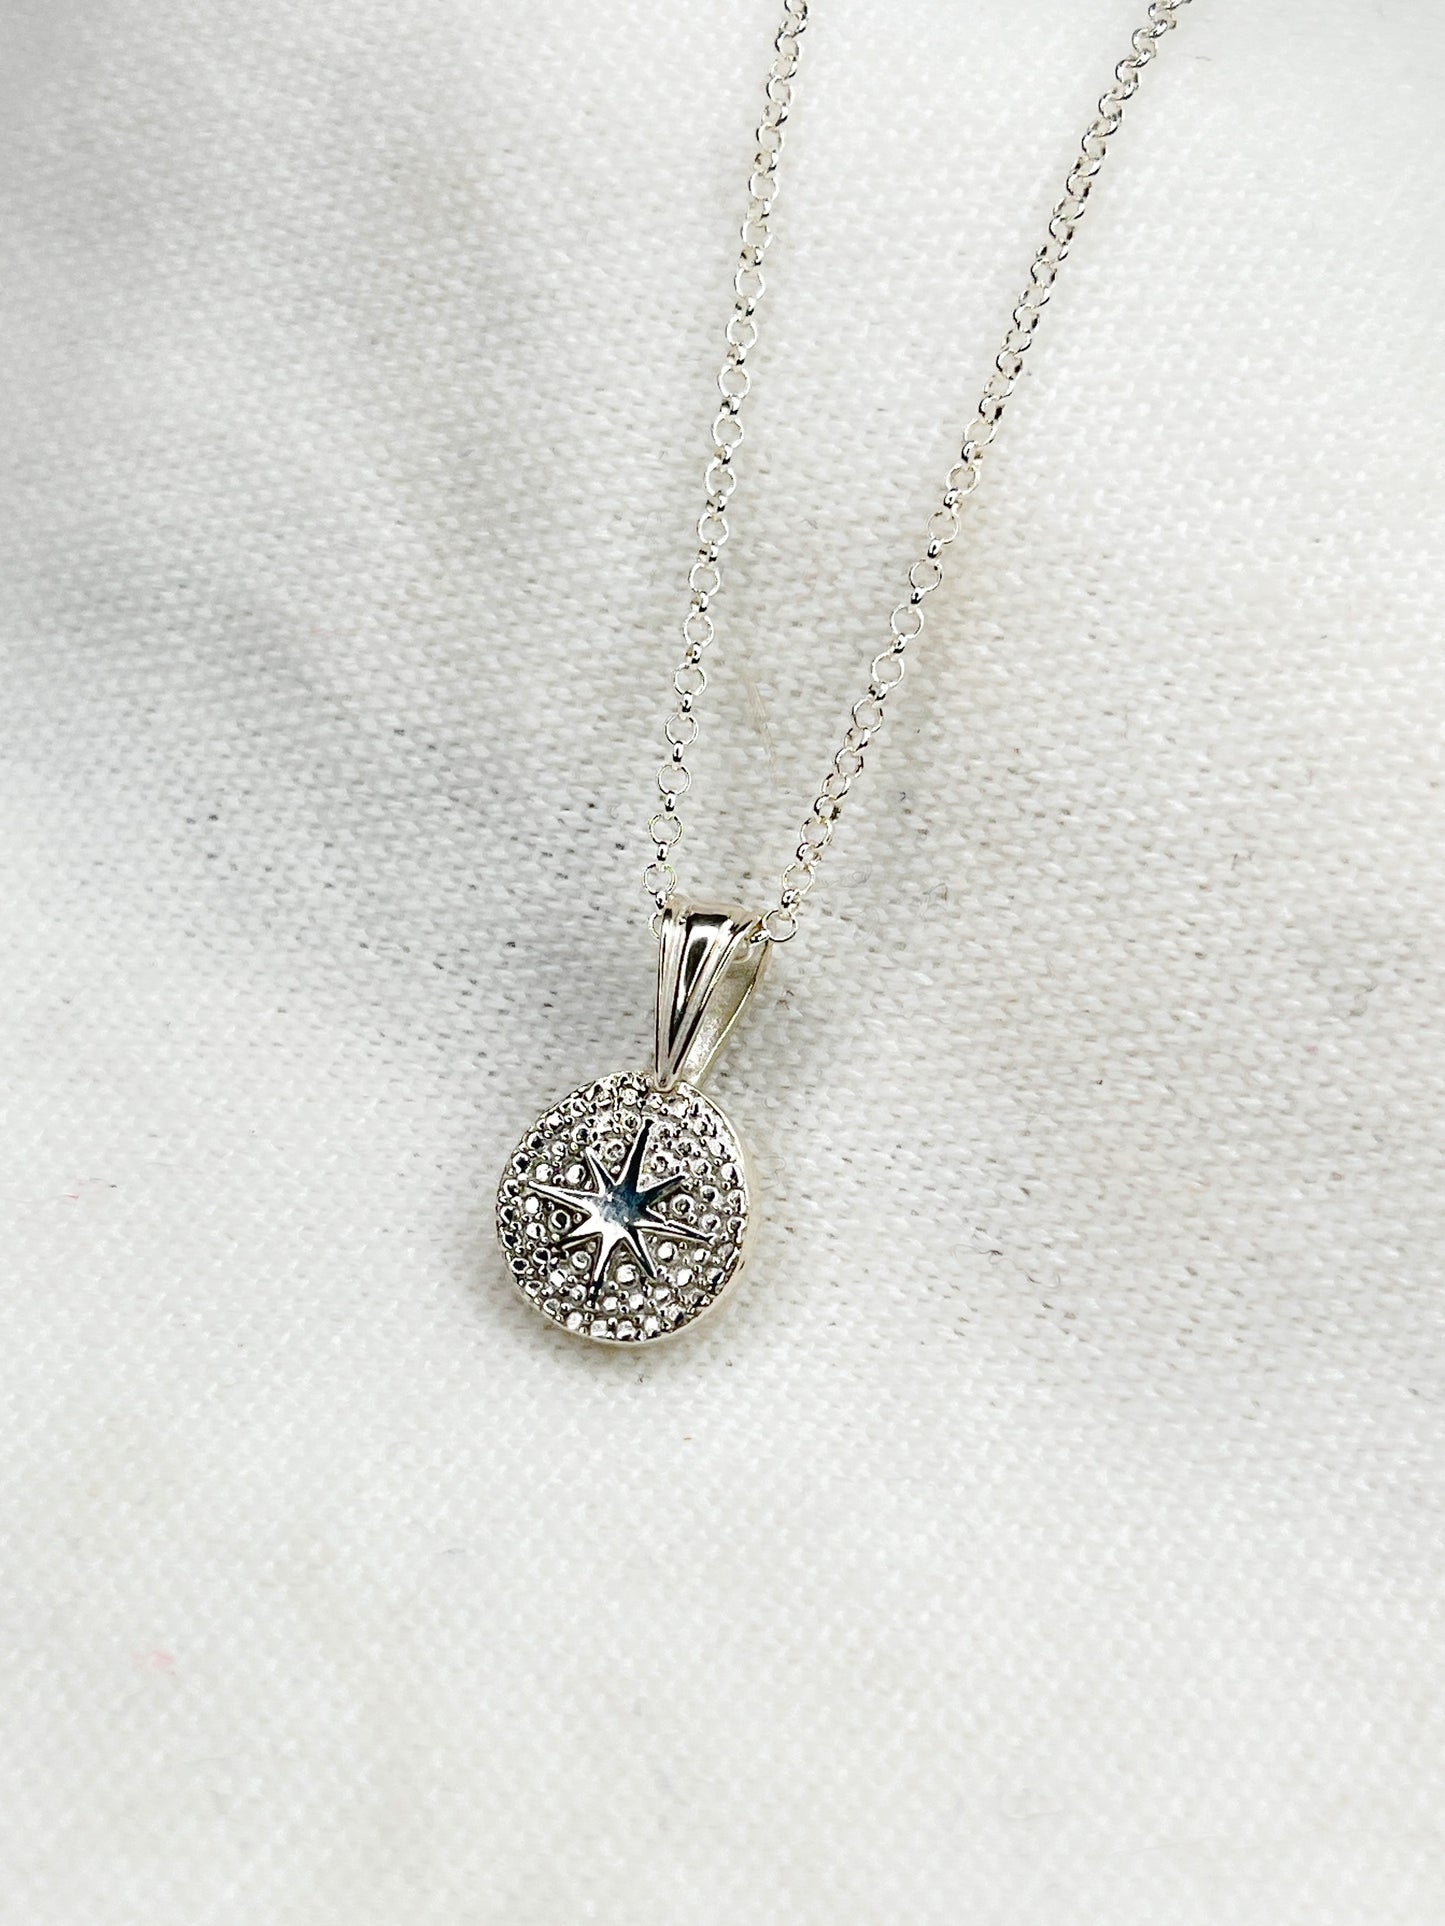 SAMPLE SALE - Sterling Silver North Star Oval Pendant Necklace